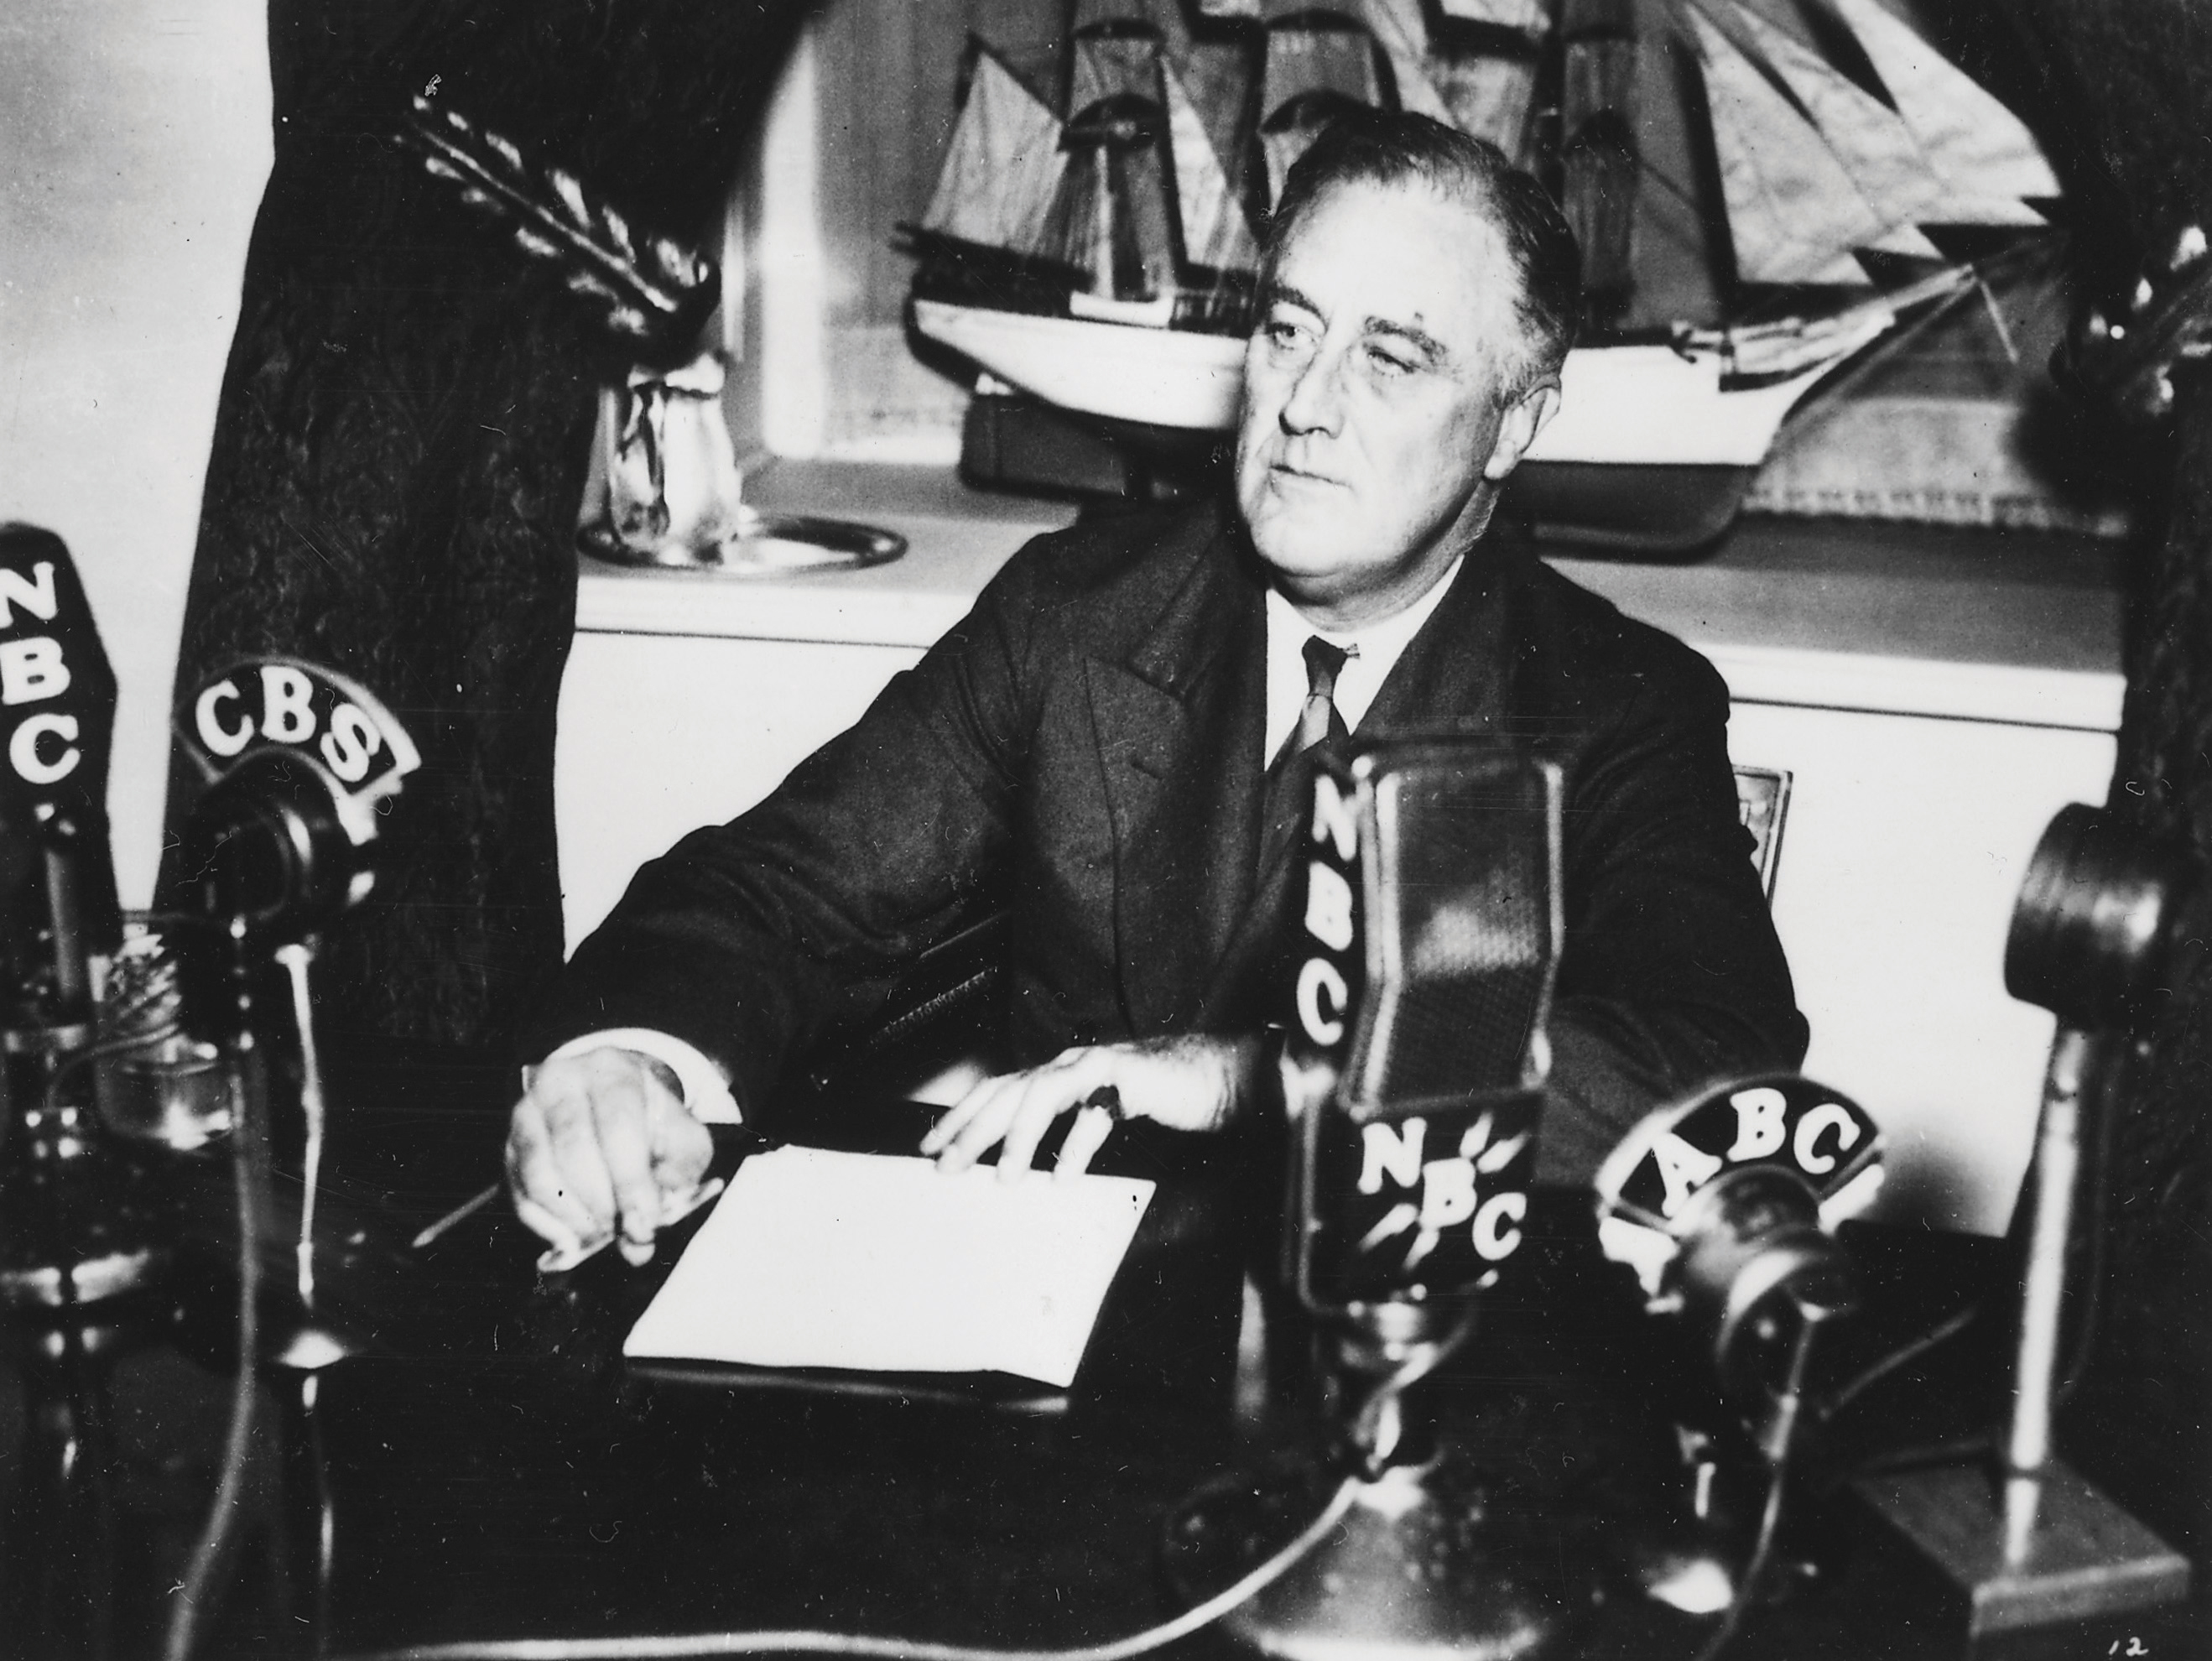 Fdr fireside chat may 27 1941